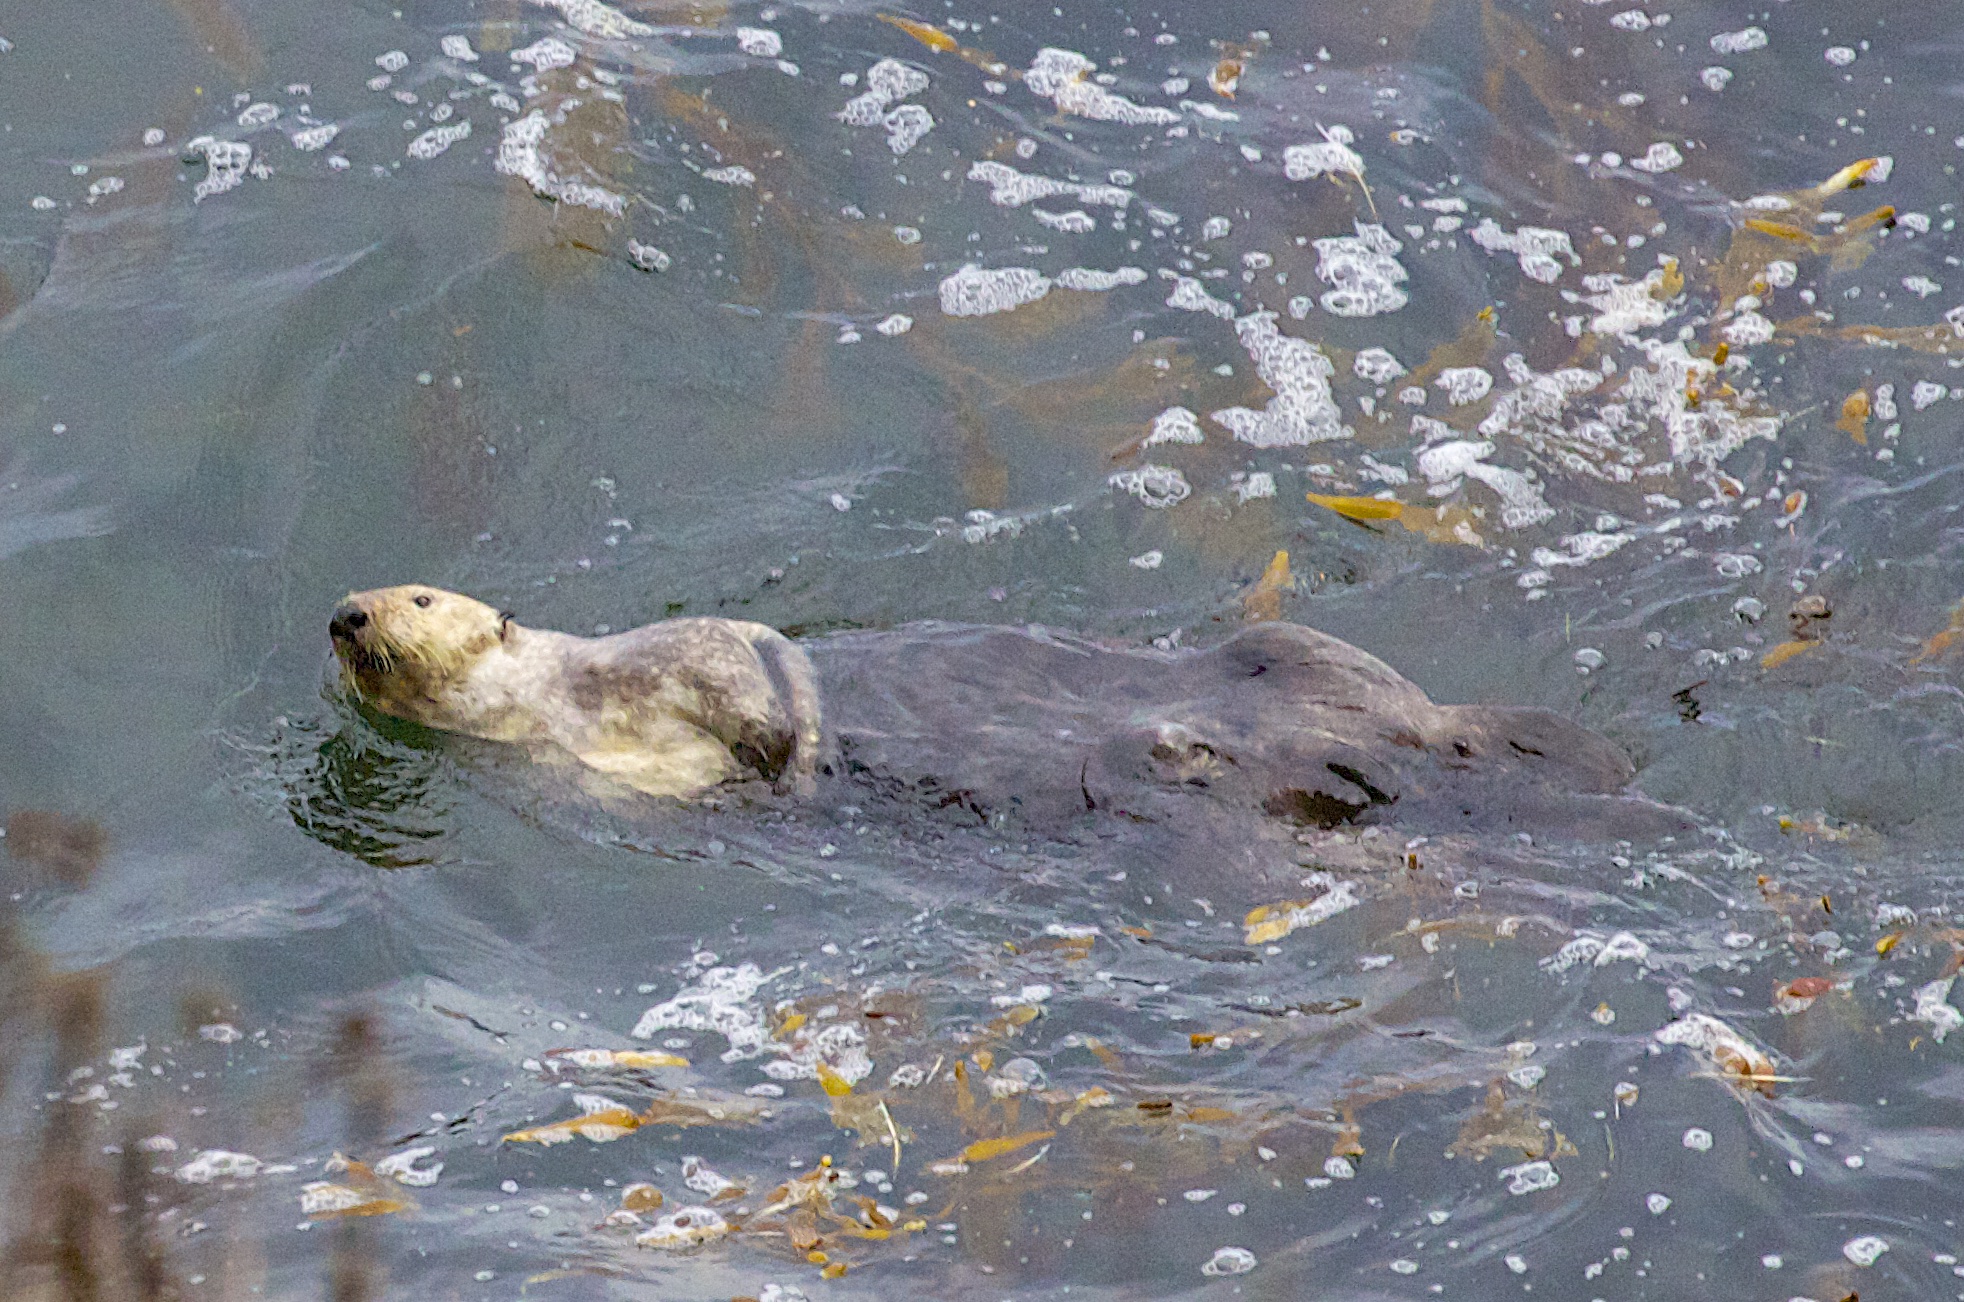 Southern Sea Otter Swimming Away While Looking At The Camera in Point Lobos State Reserve, California